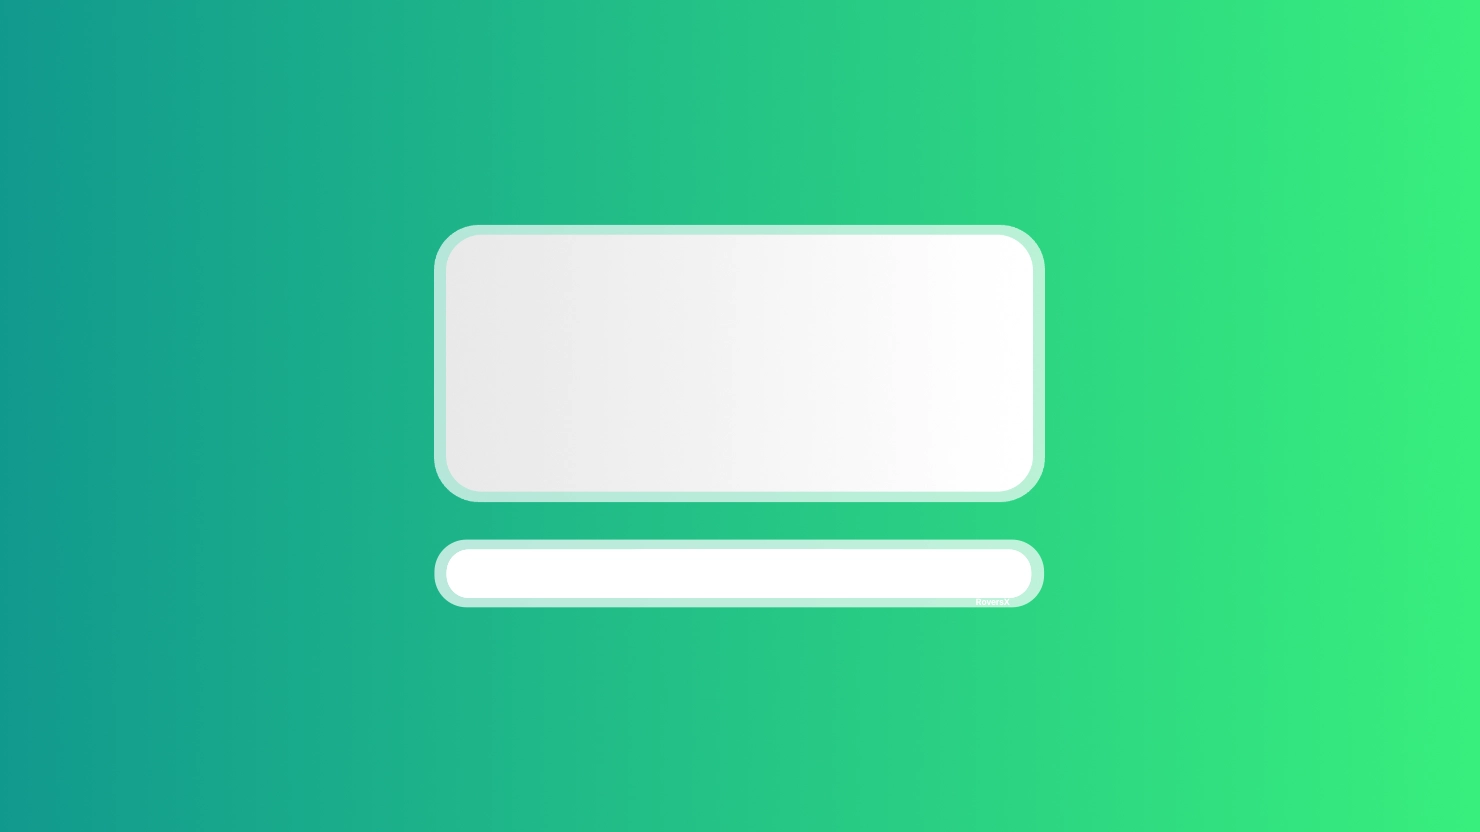 A stylized footer icon.